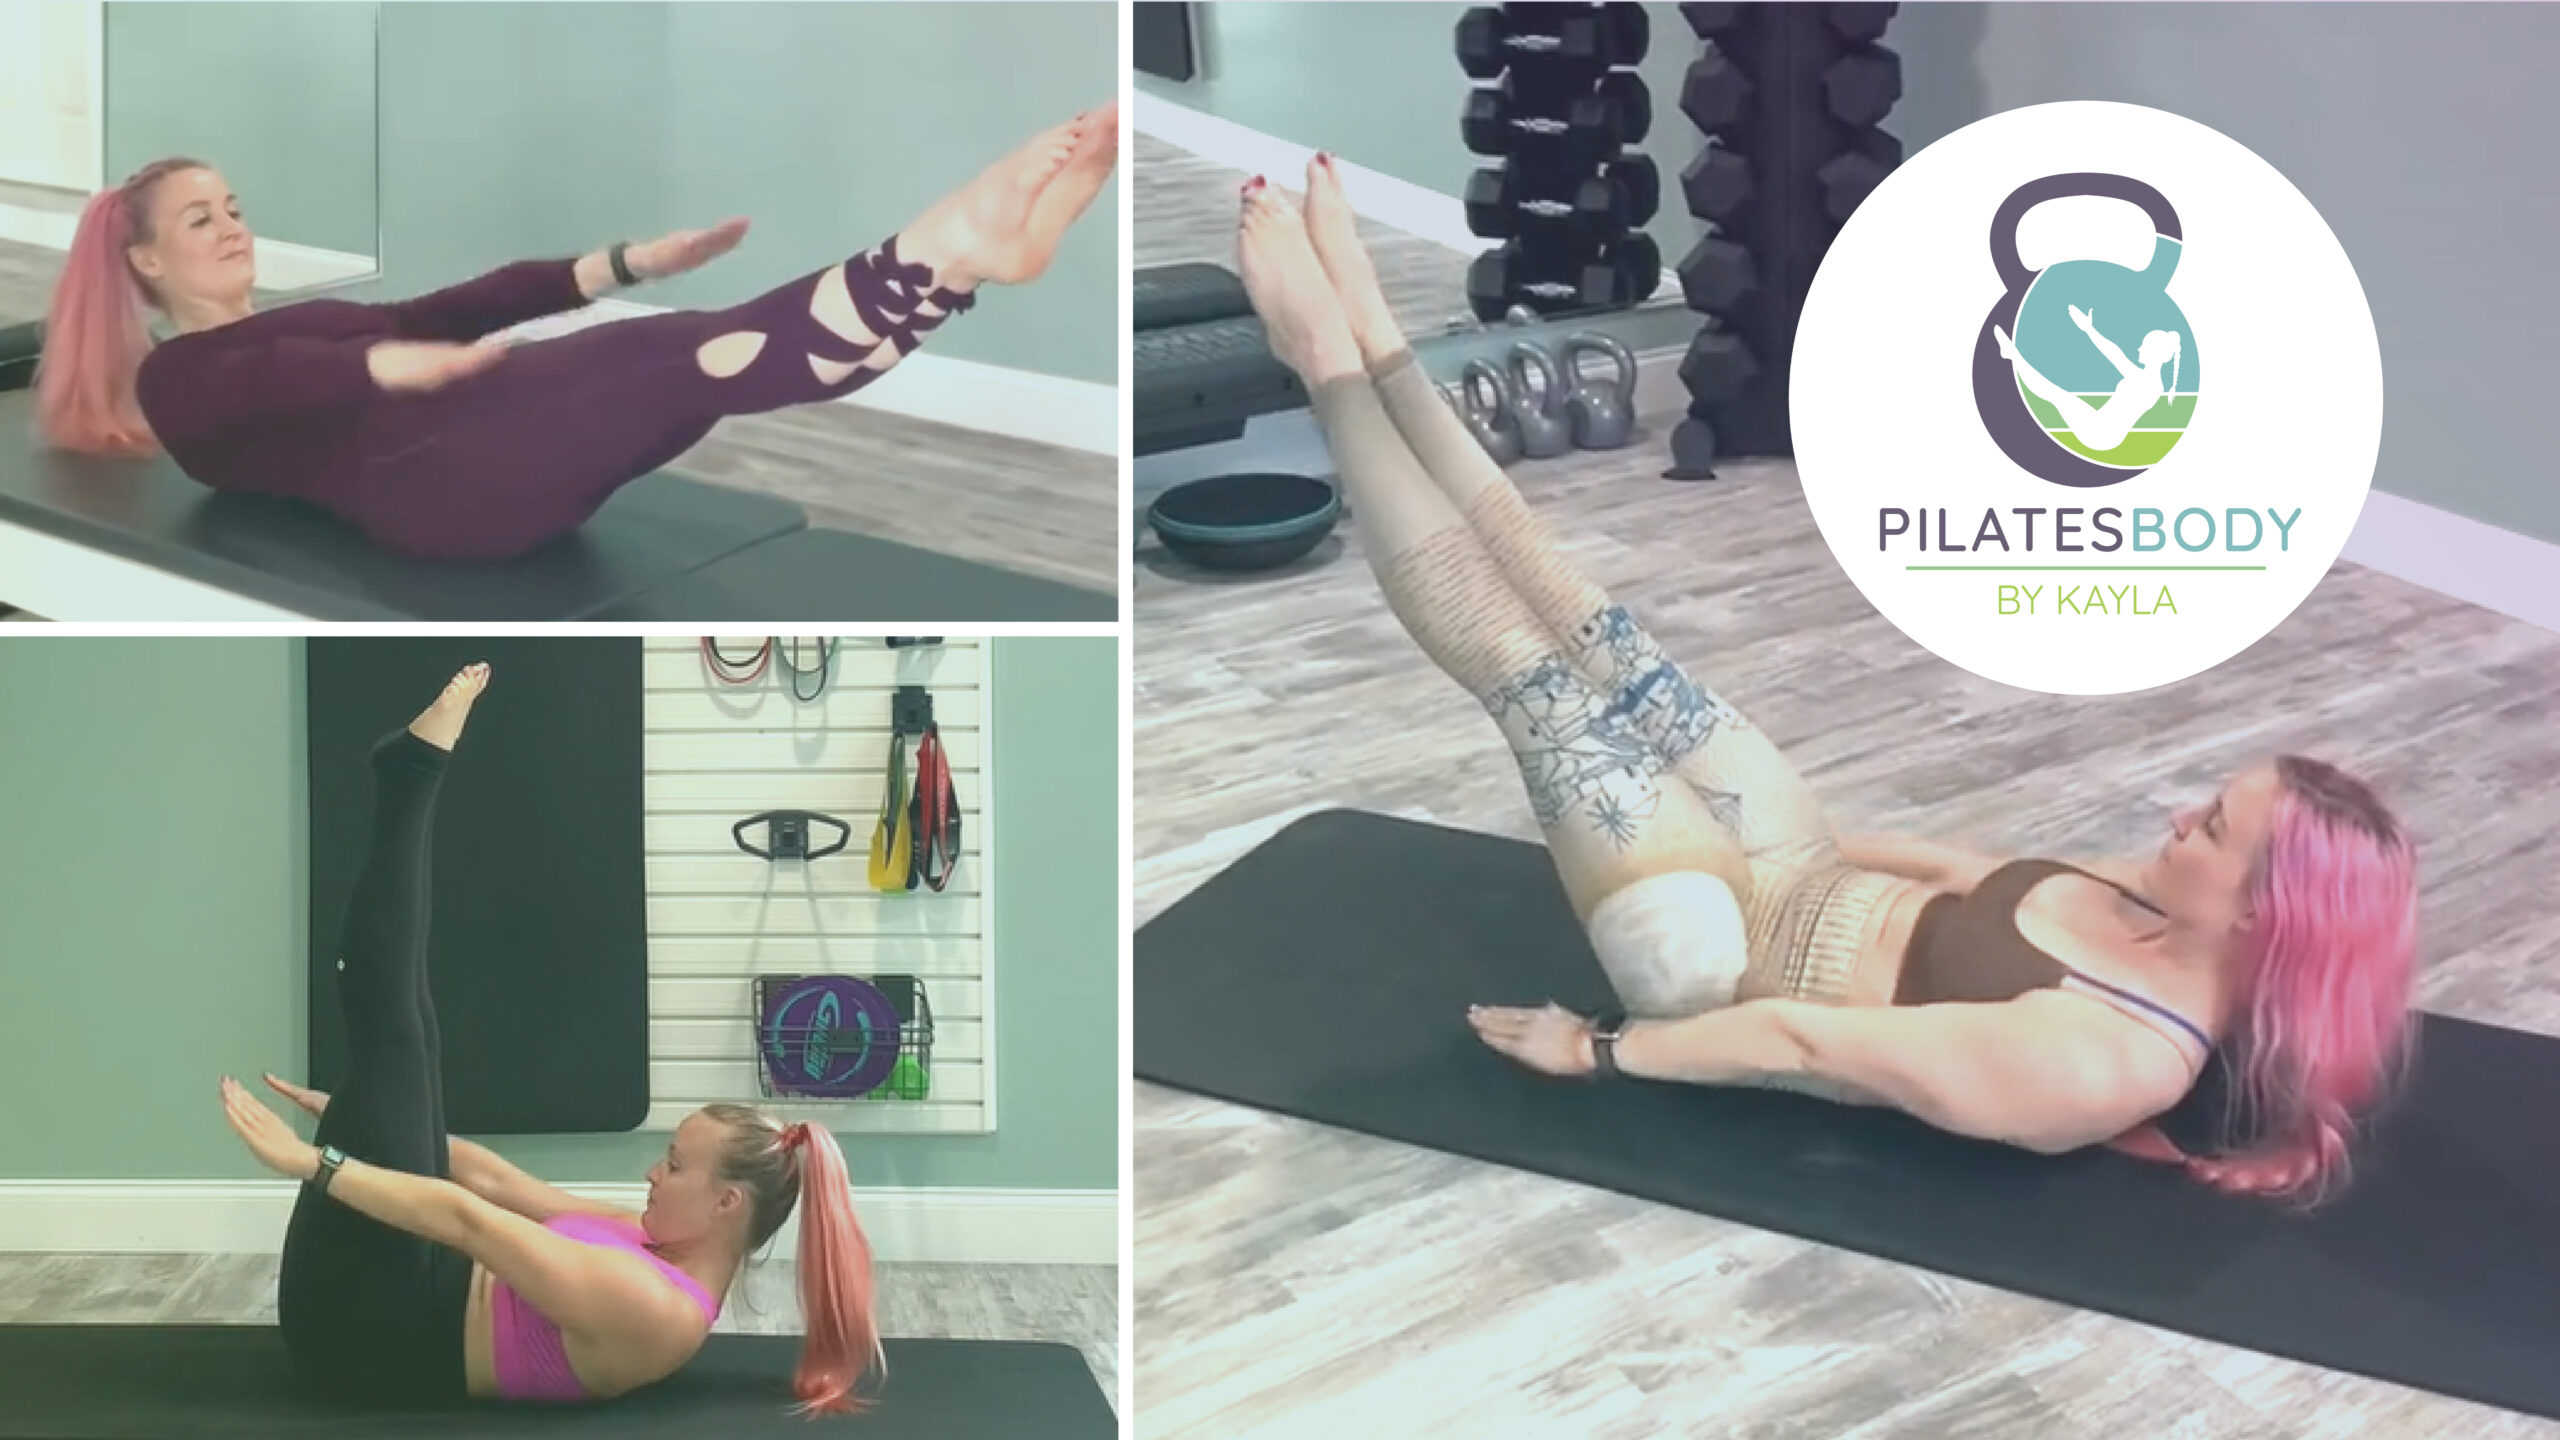 How to Do The Pilates Hundred Exercise: With Video Demonstration